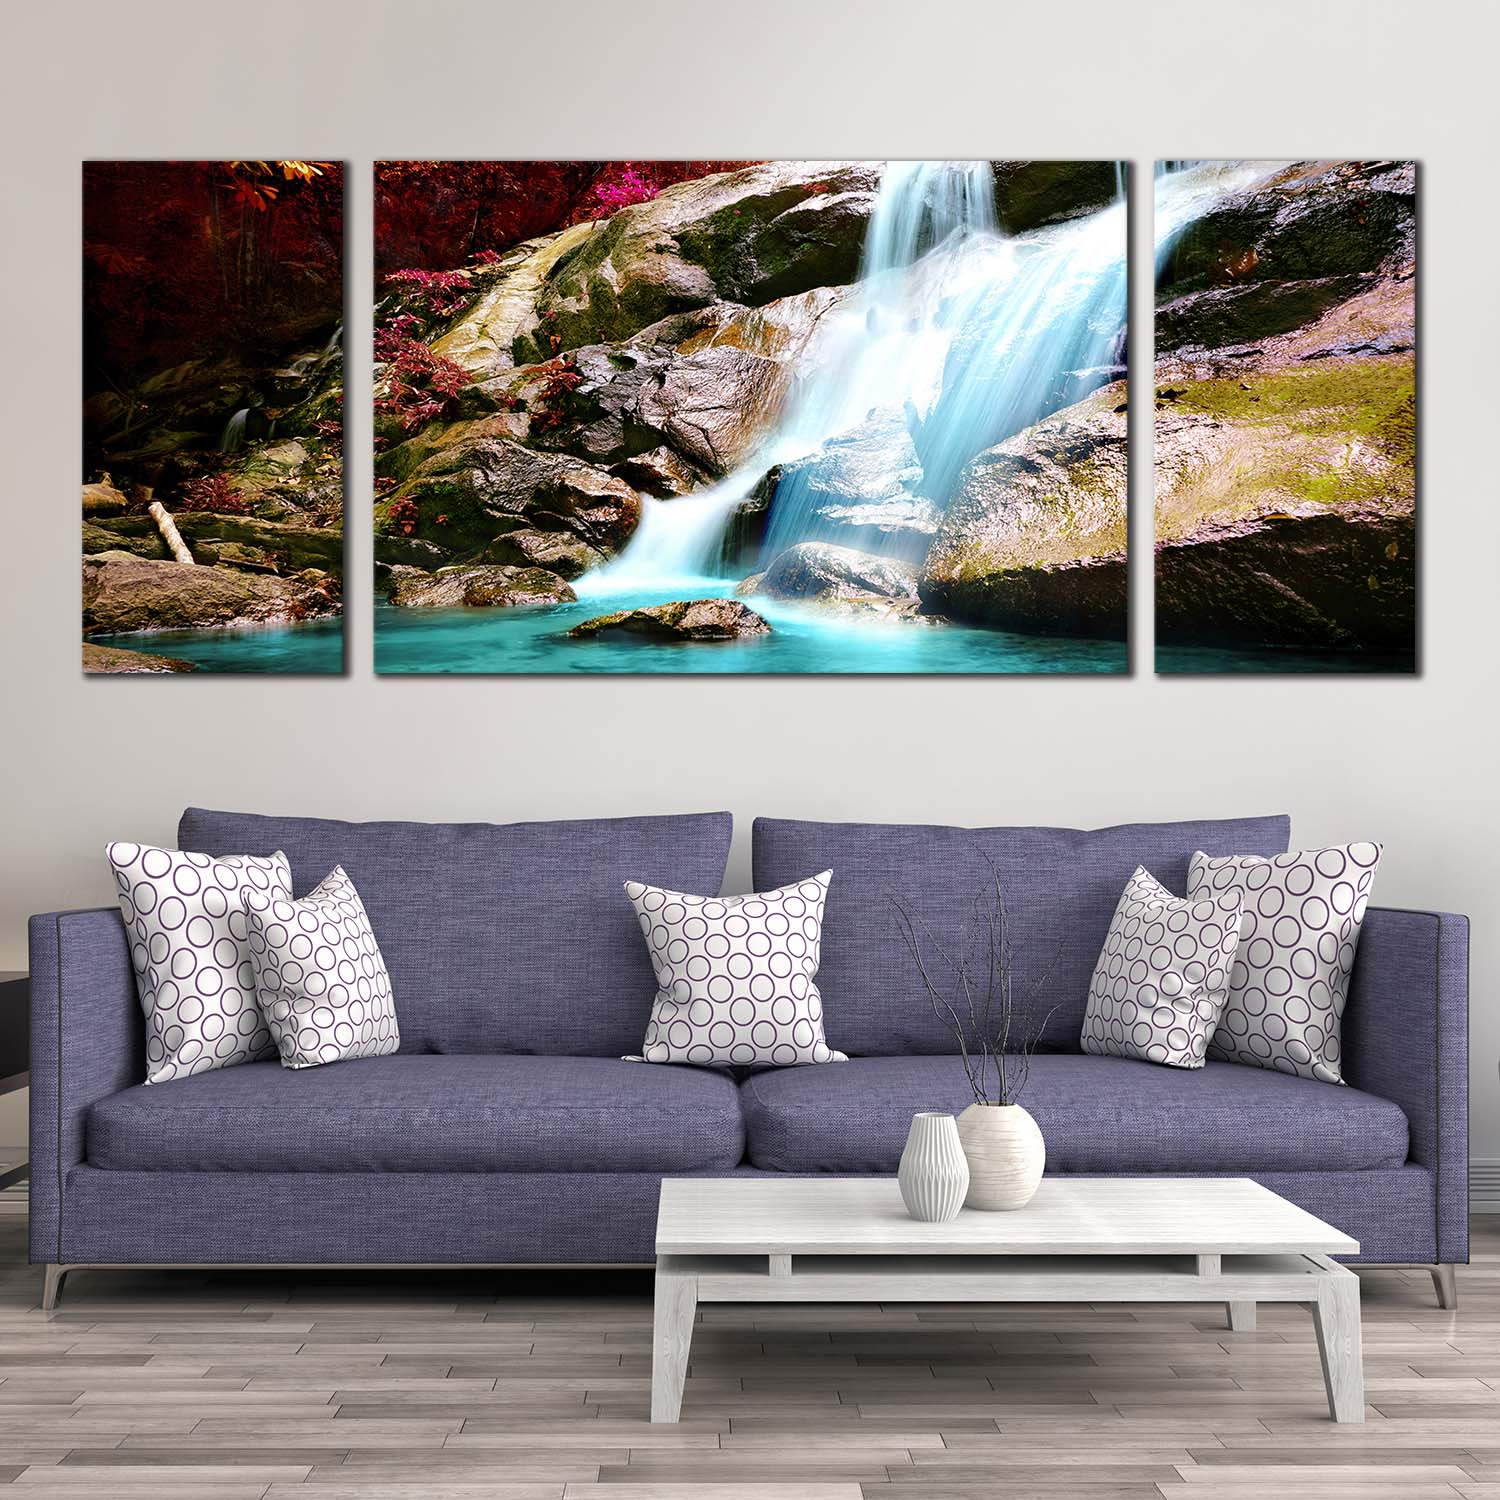 Amazing Scenery Canvas Wal art, Red Trees Forest Waterfall 3 Piece Can ...